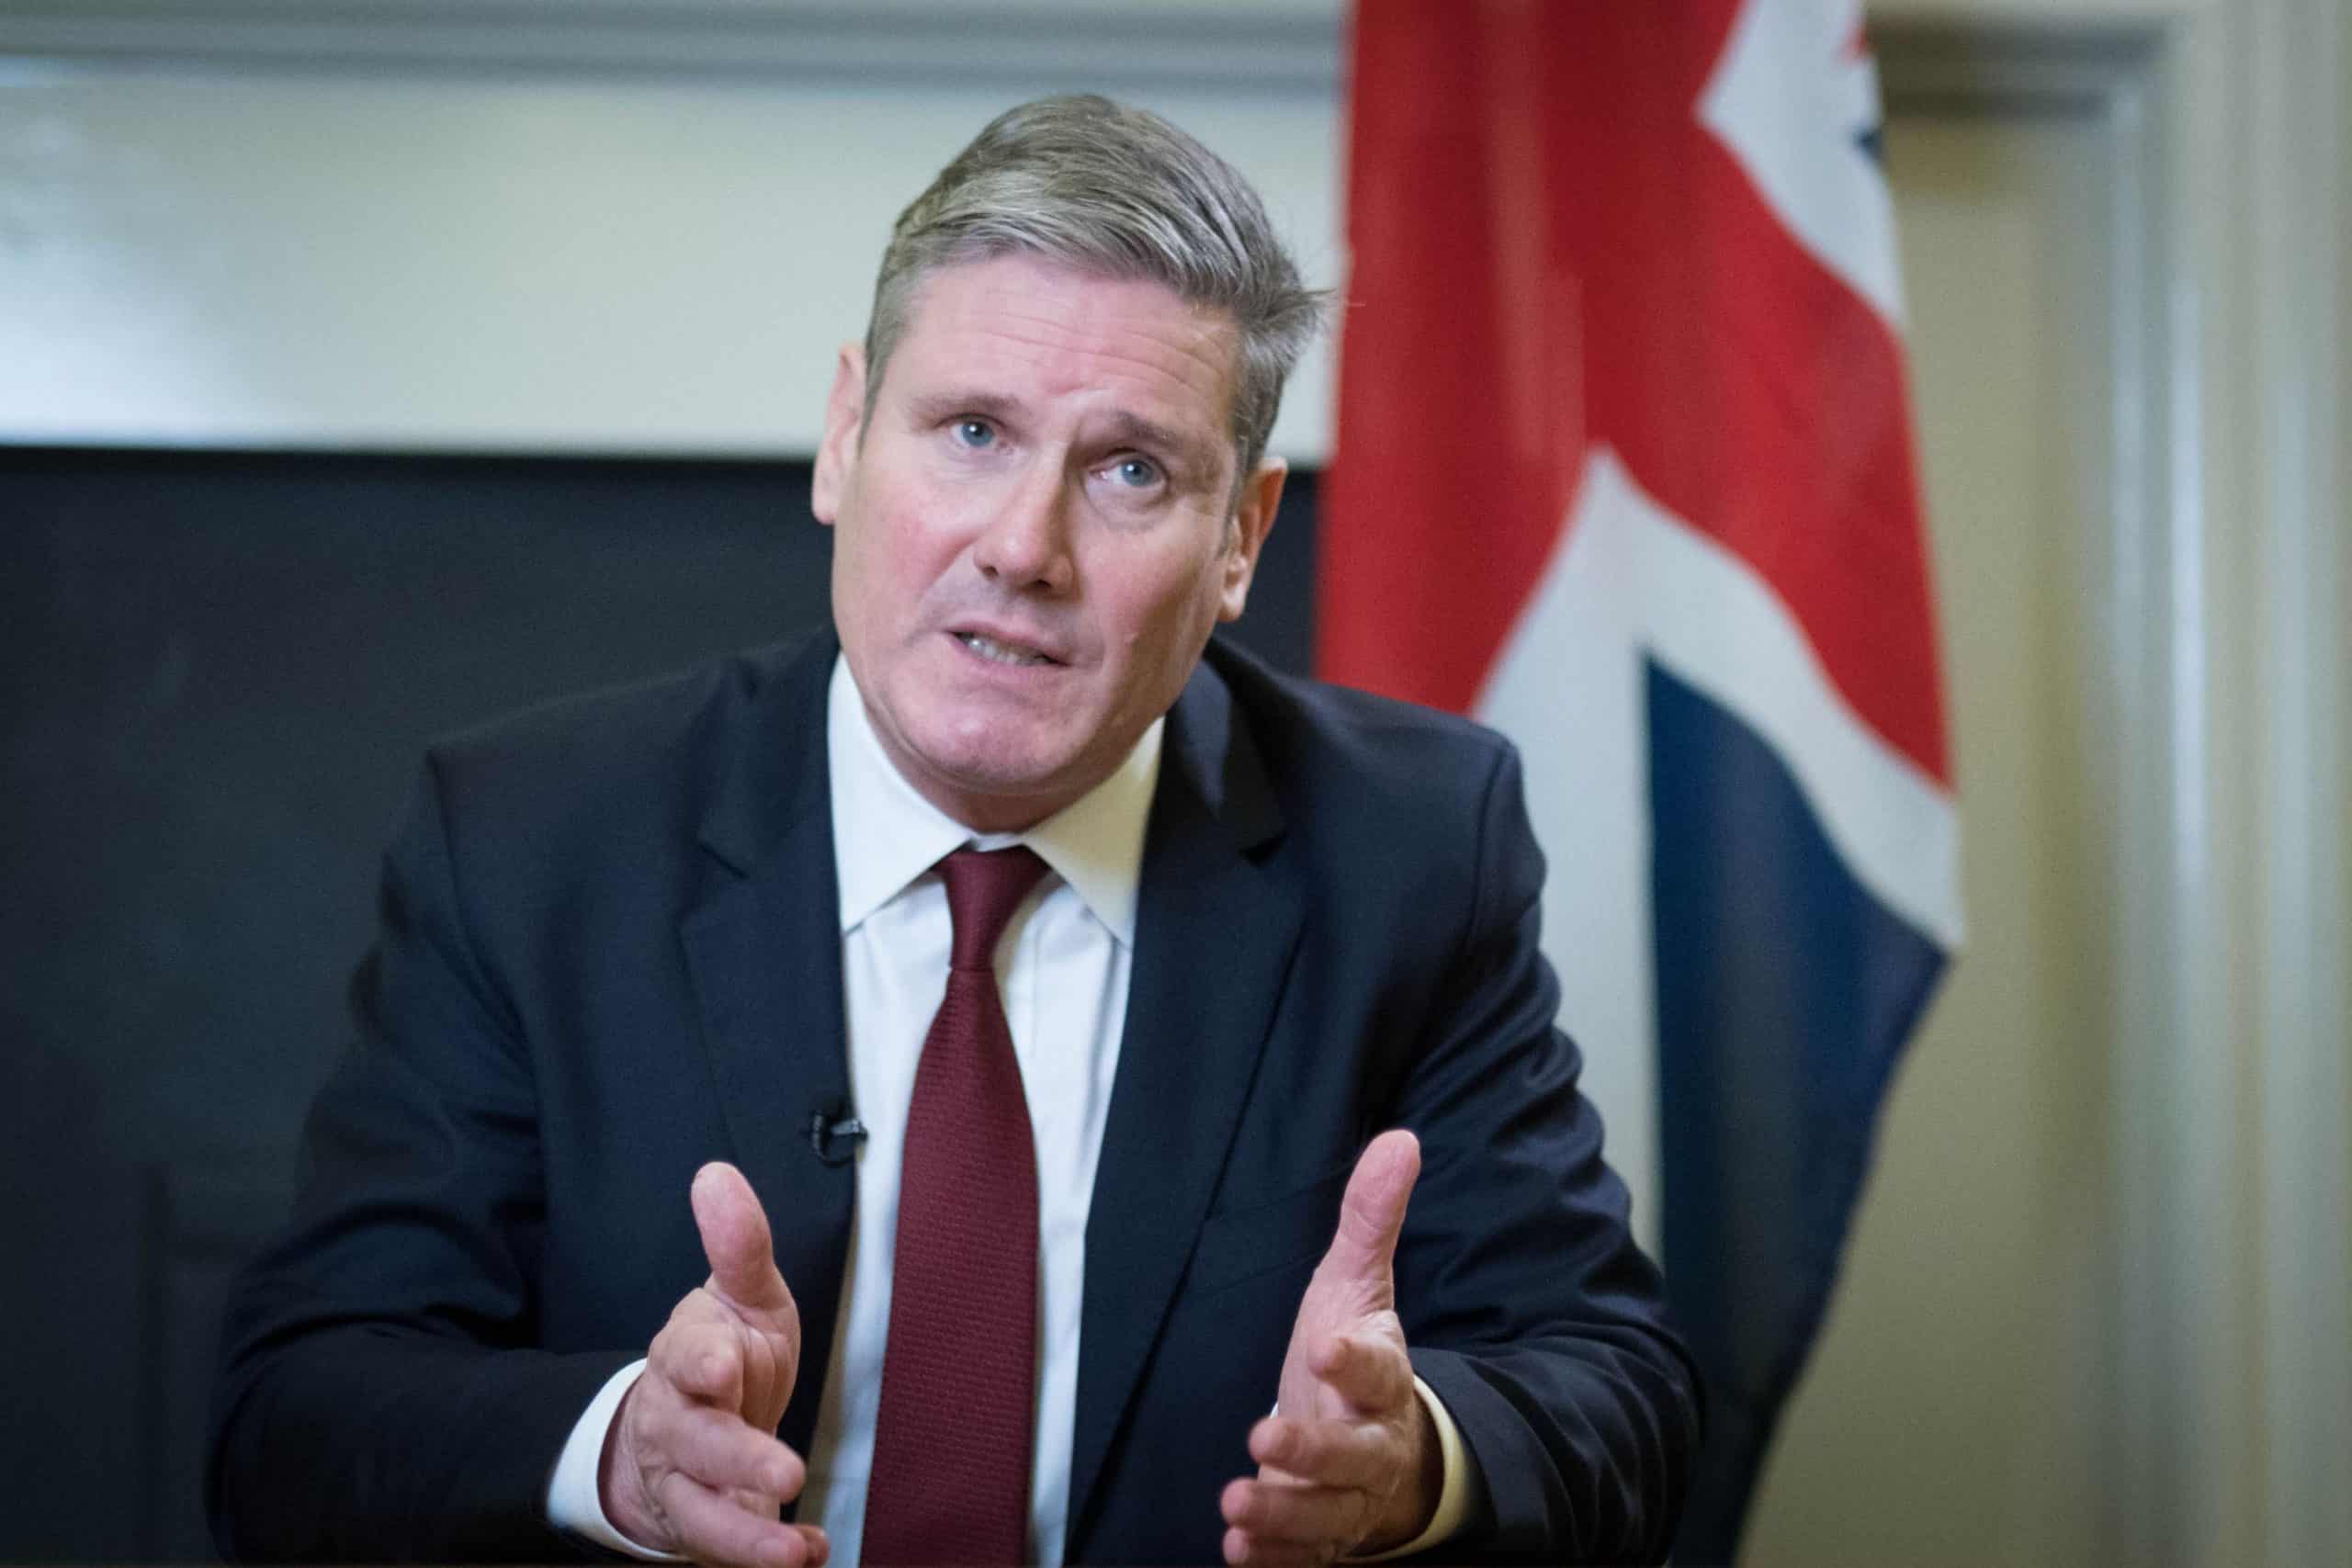 Conservative lead slashed to 3 points as Starmer calls on Labour to modernise